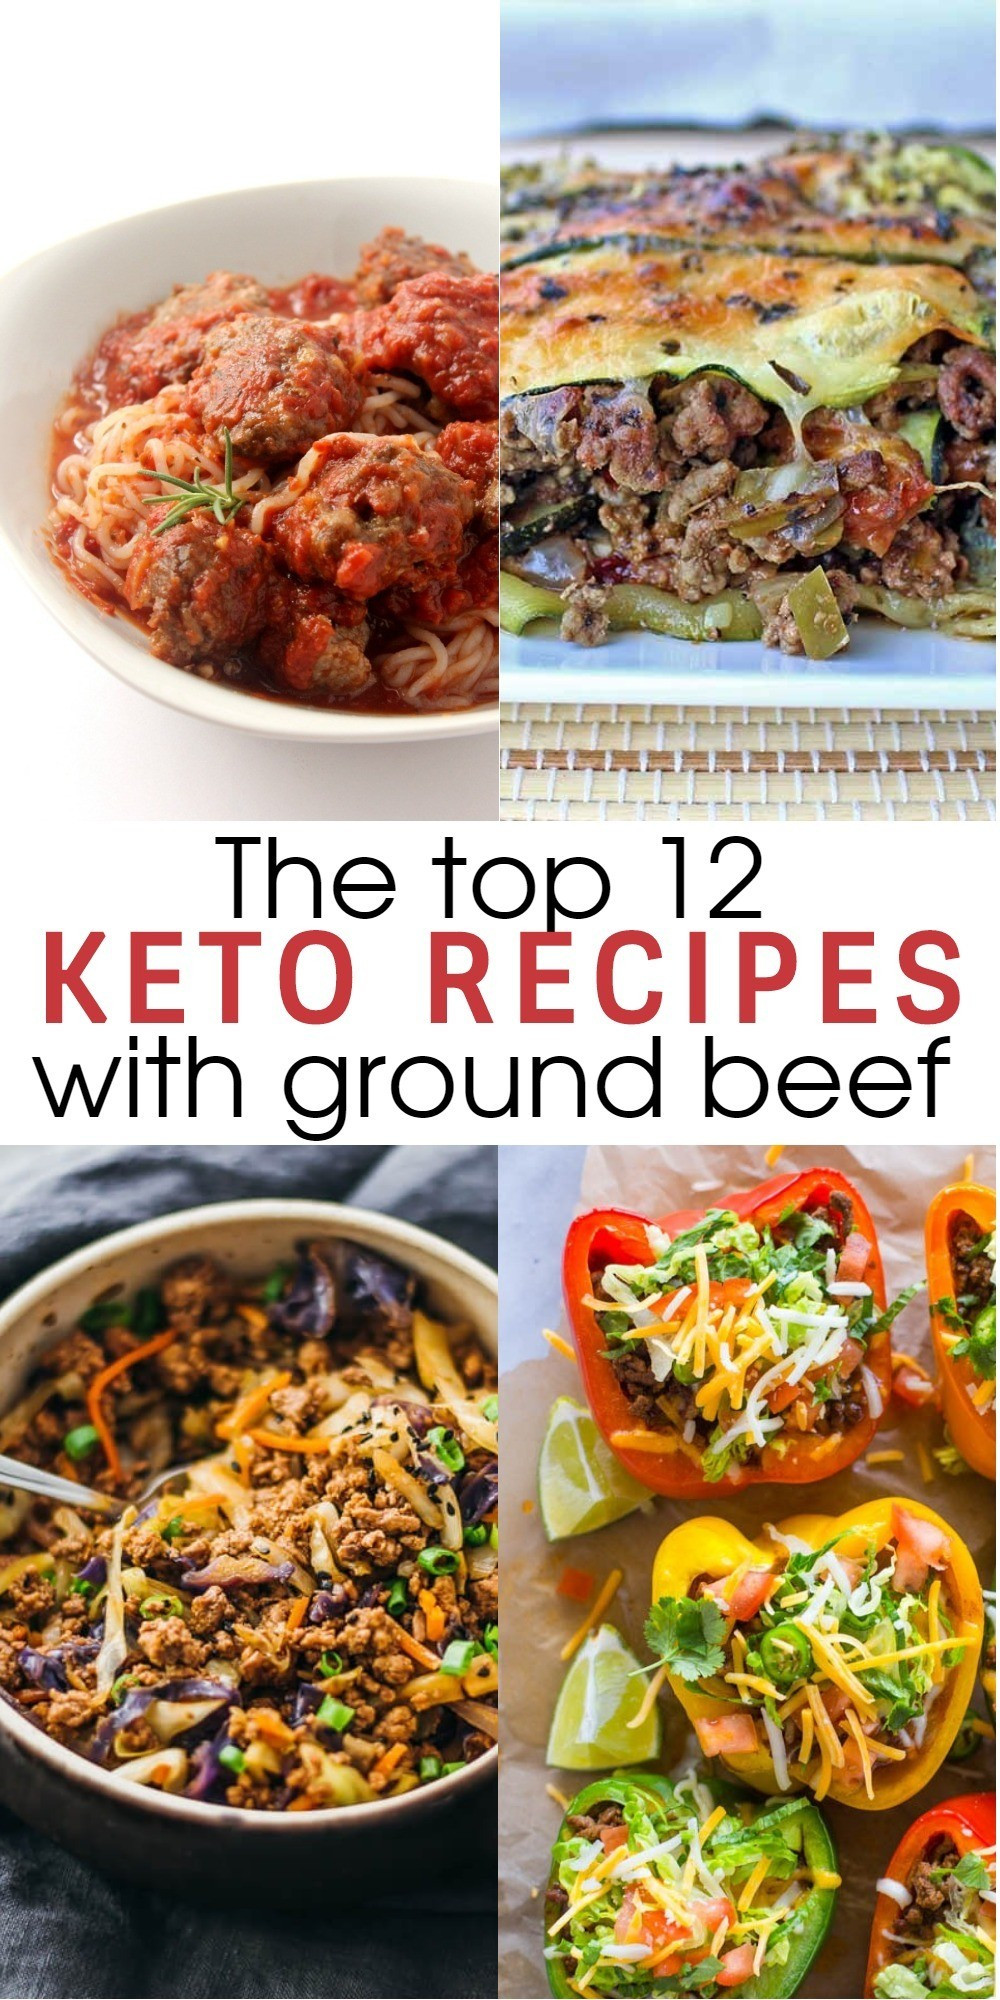 Keto Diet Recipes Dinners Ground Beef
 12 Flavorful and Easy Keto Recipes With Ground Beef To Try